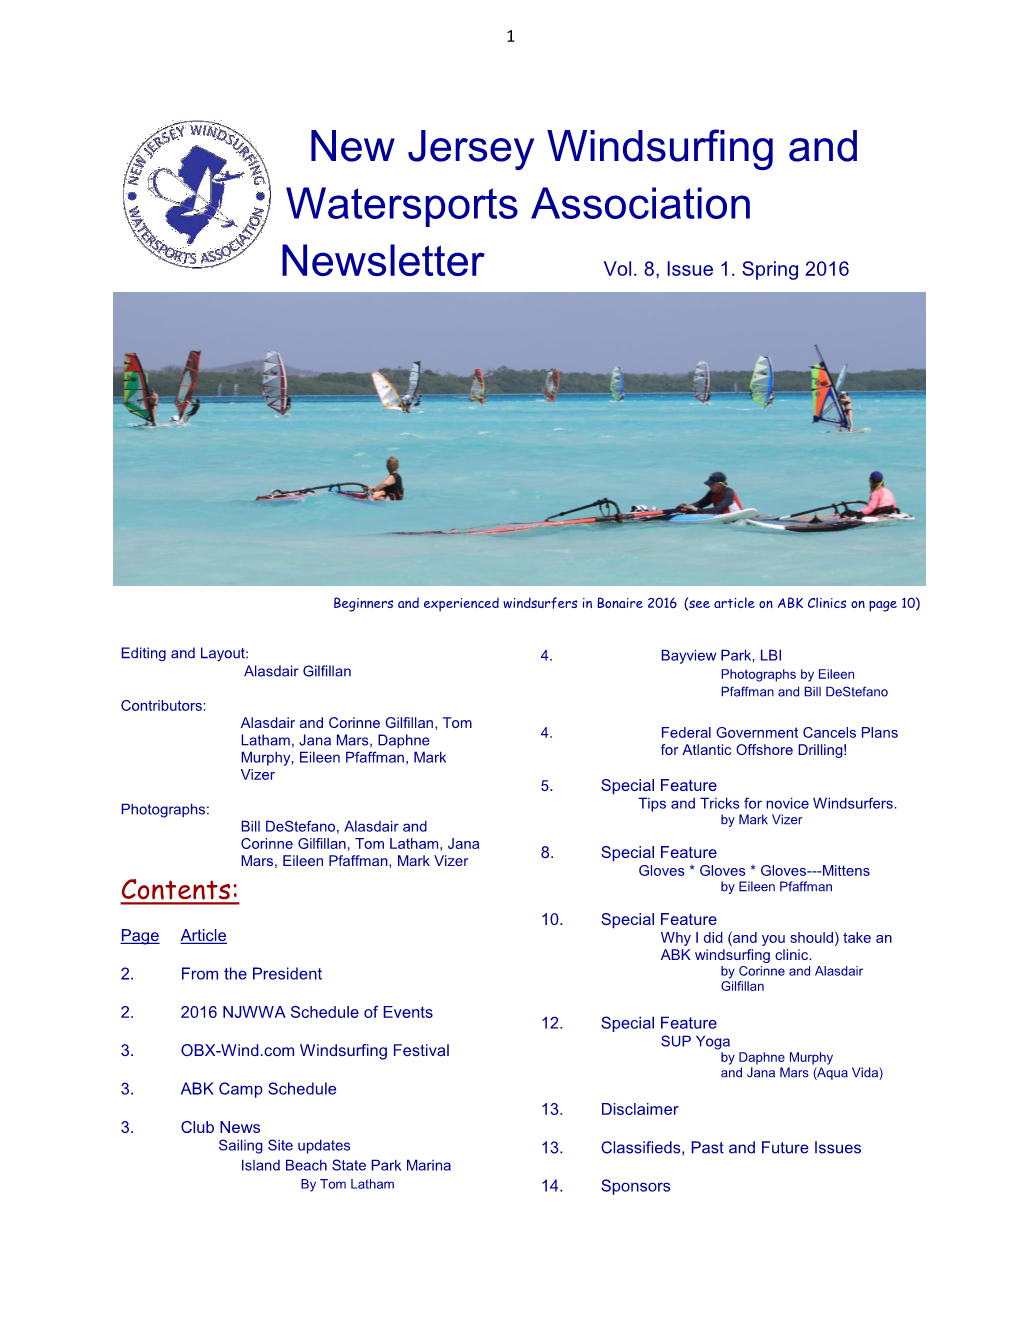 New Jersey Windsurfing and Watersports Association Newsletter